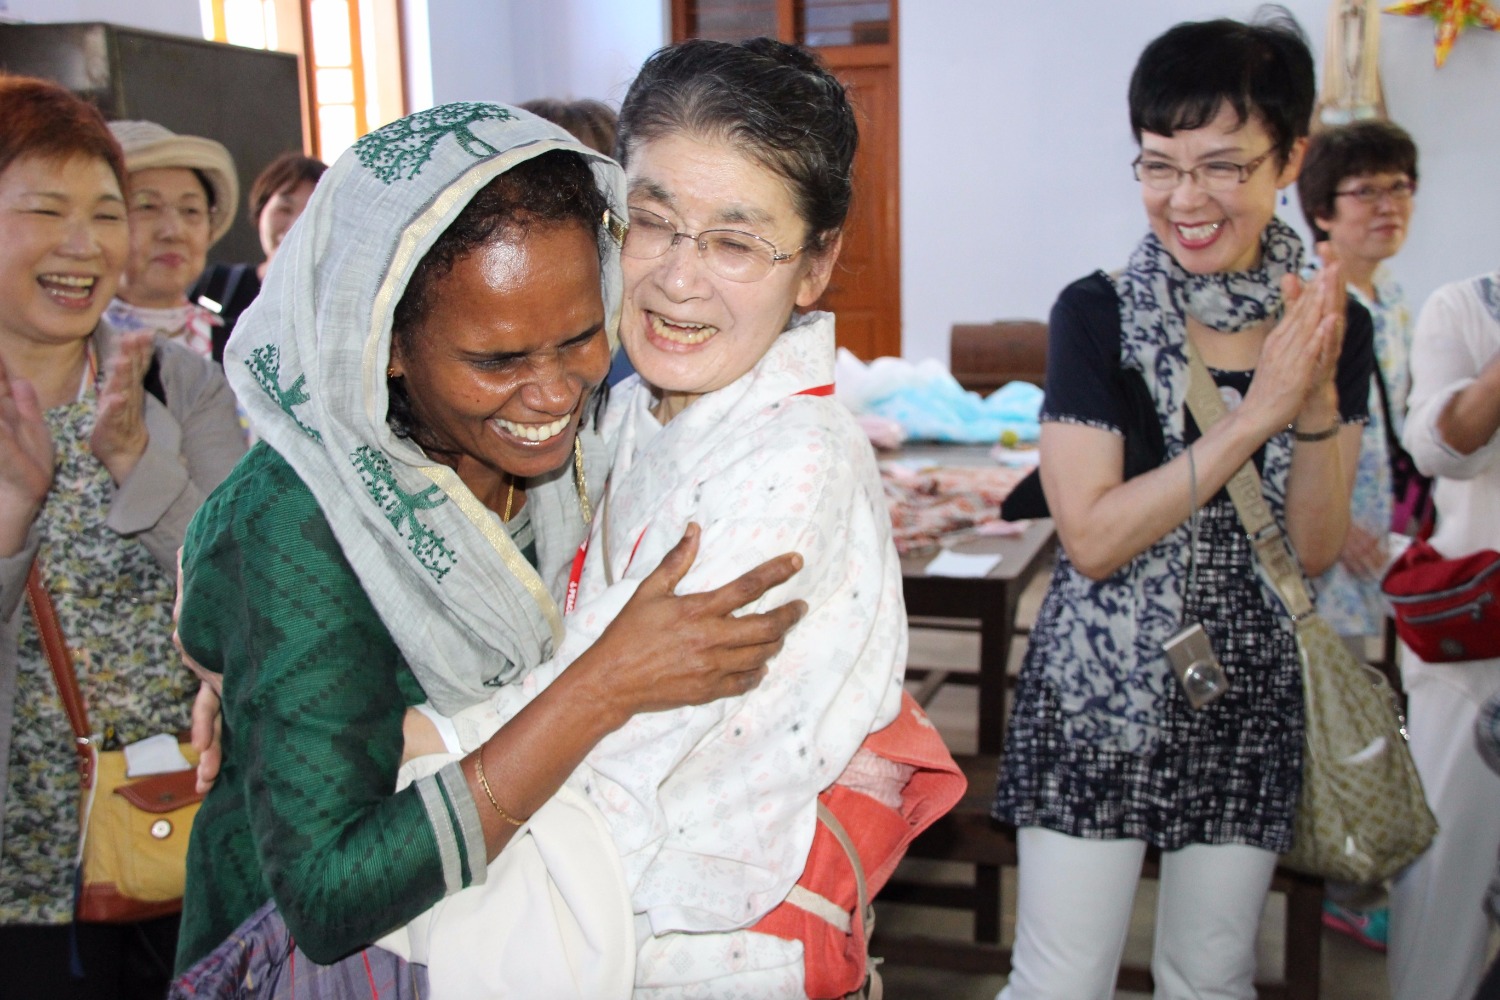 A Japanese woman in her sixties, wearing a white tunic, hugging a black-haired woman who is wearing a green Indian dress, and, on her head, a white scarf embroidered with a tree pattern. Both women smile spontaneously. Around them, other women smile and clap their hands.